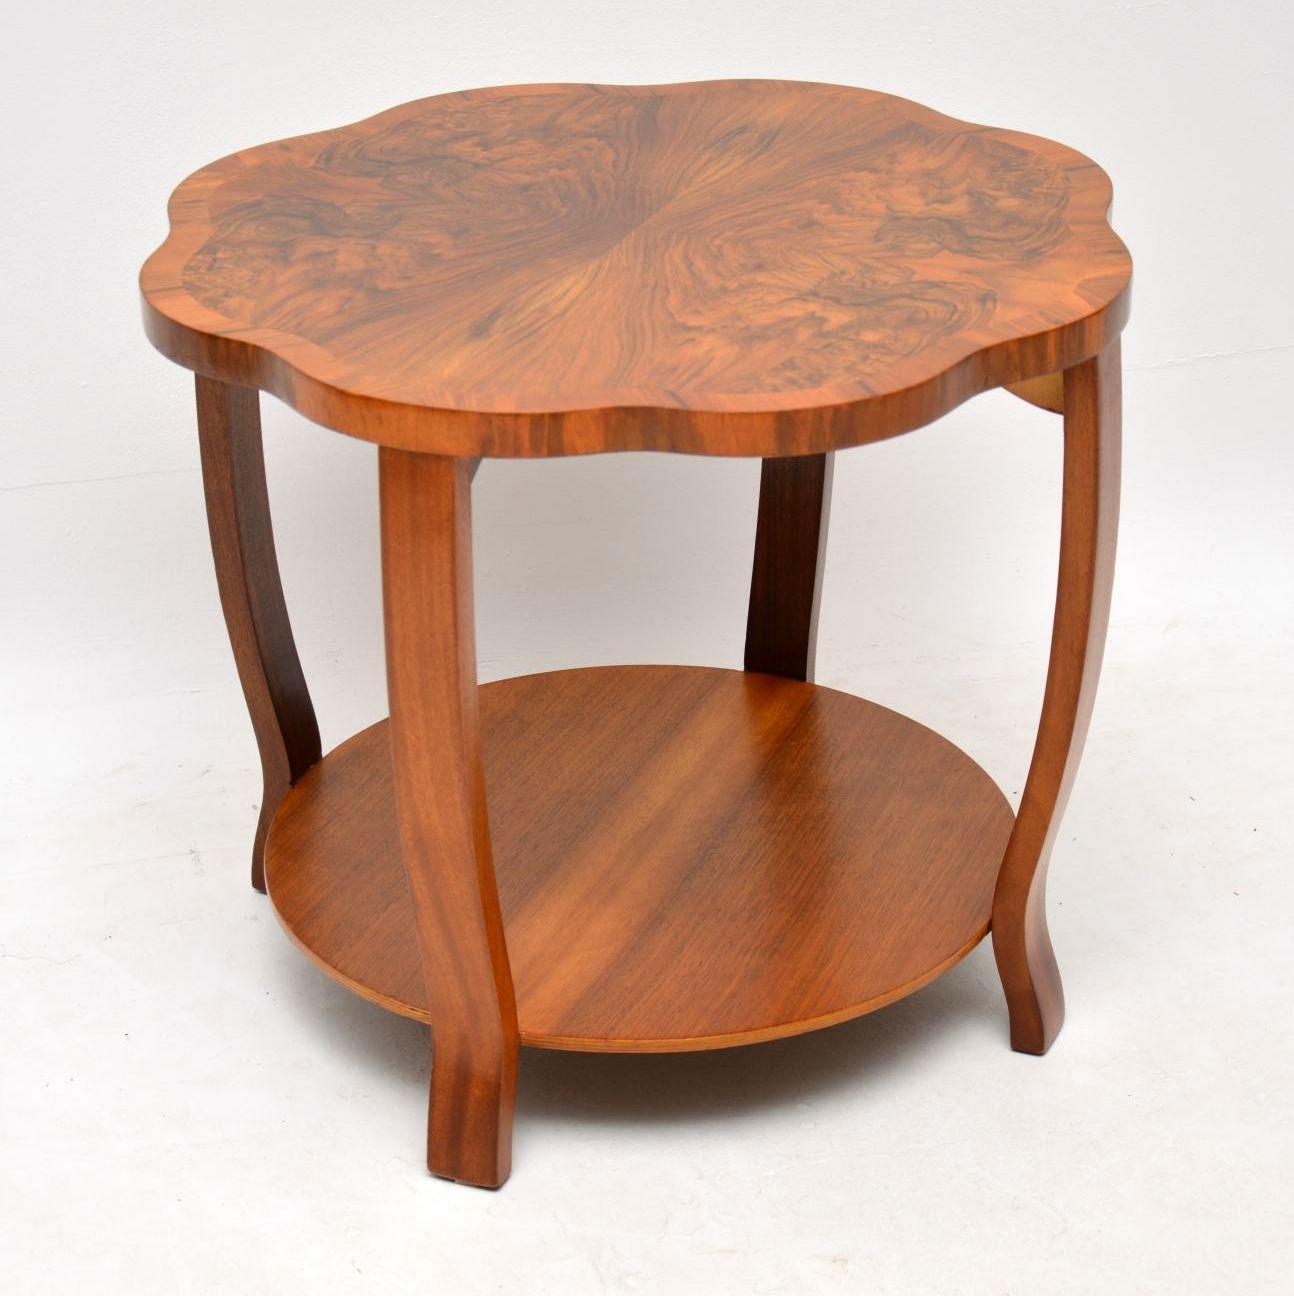 A beautiful original Art Deco period coffee table in walnut, this dates from the 1920s-1930s. It has a lovely shape and has an additional lower tier which is always useful for extra storage. We have had this stripped and re-polished to a very high